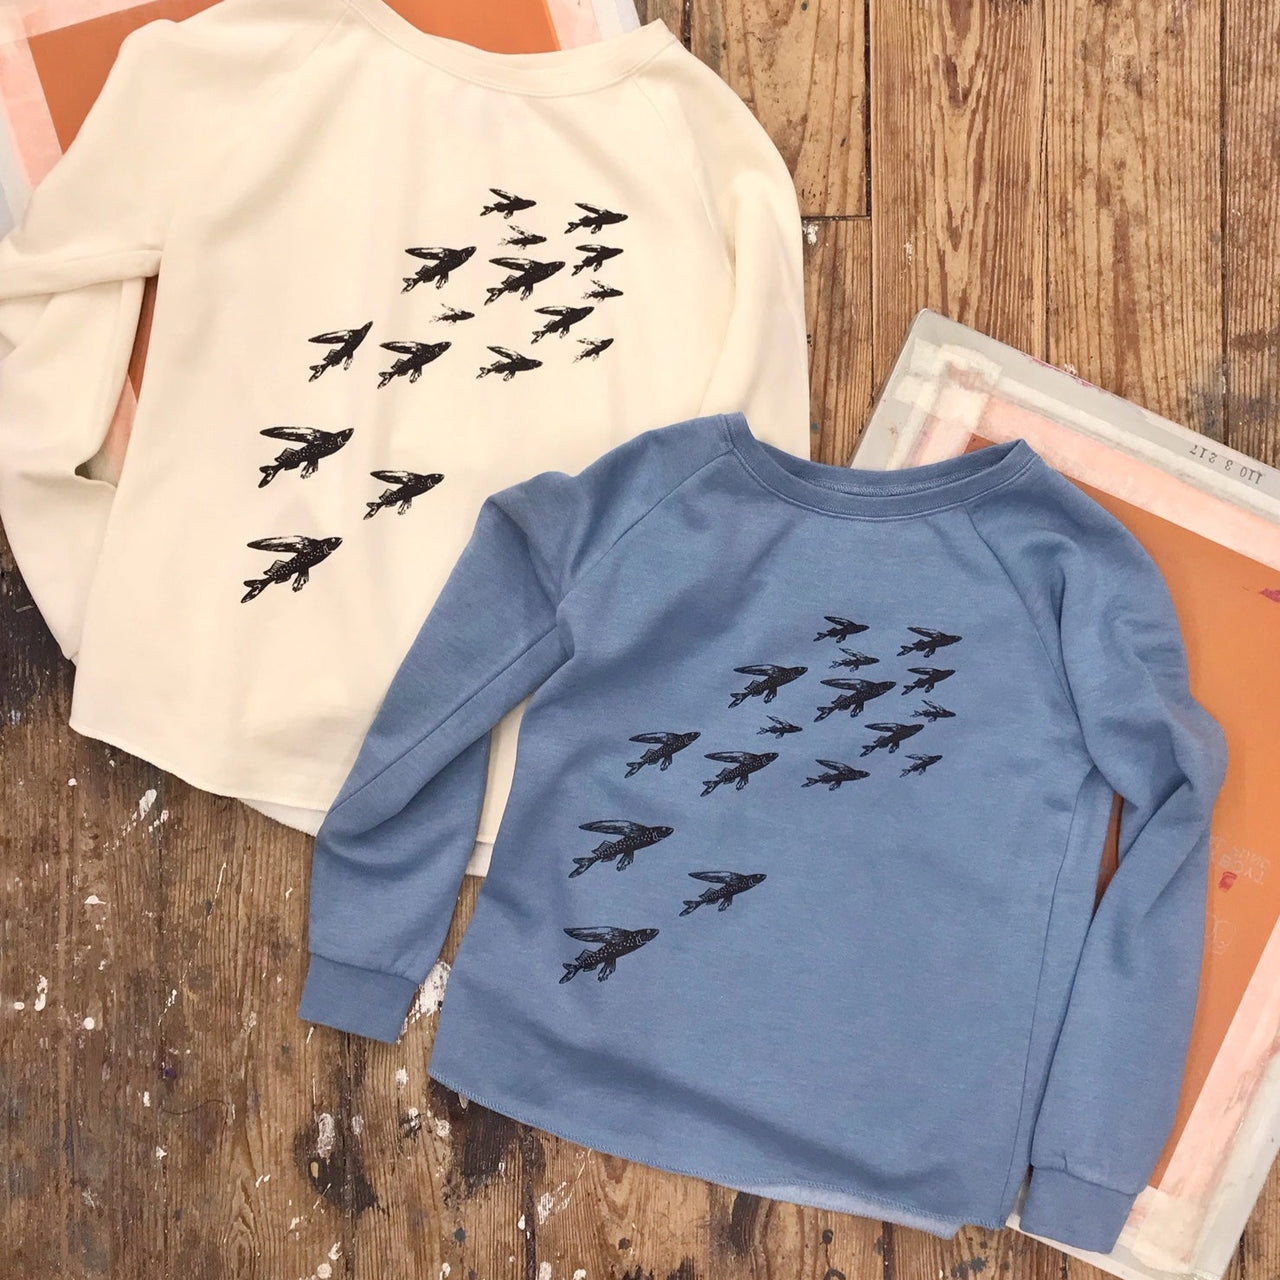 Two of the 'School of Fish' sweatshirts. One in bone cream and the other in misty blue.